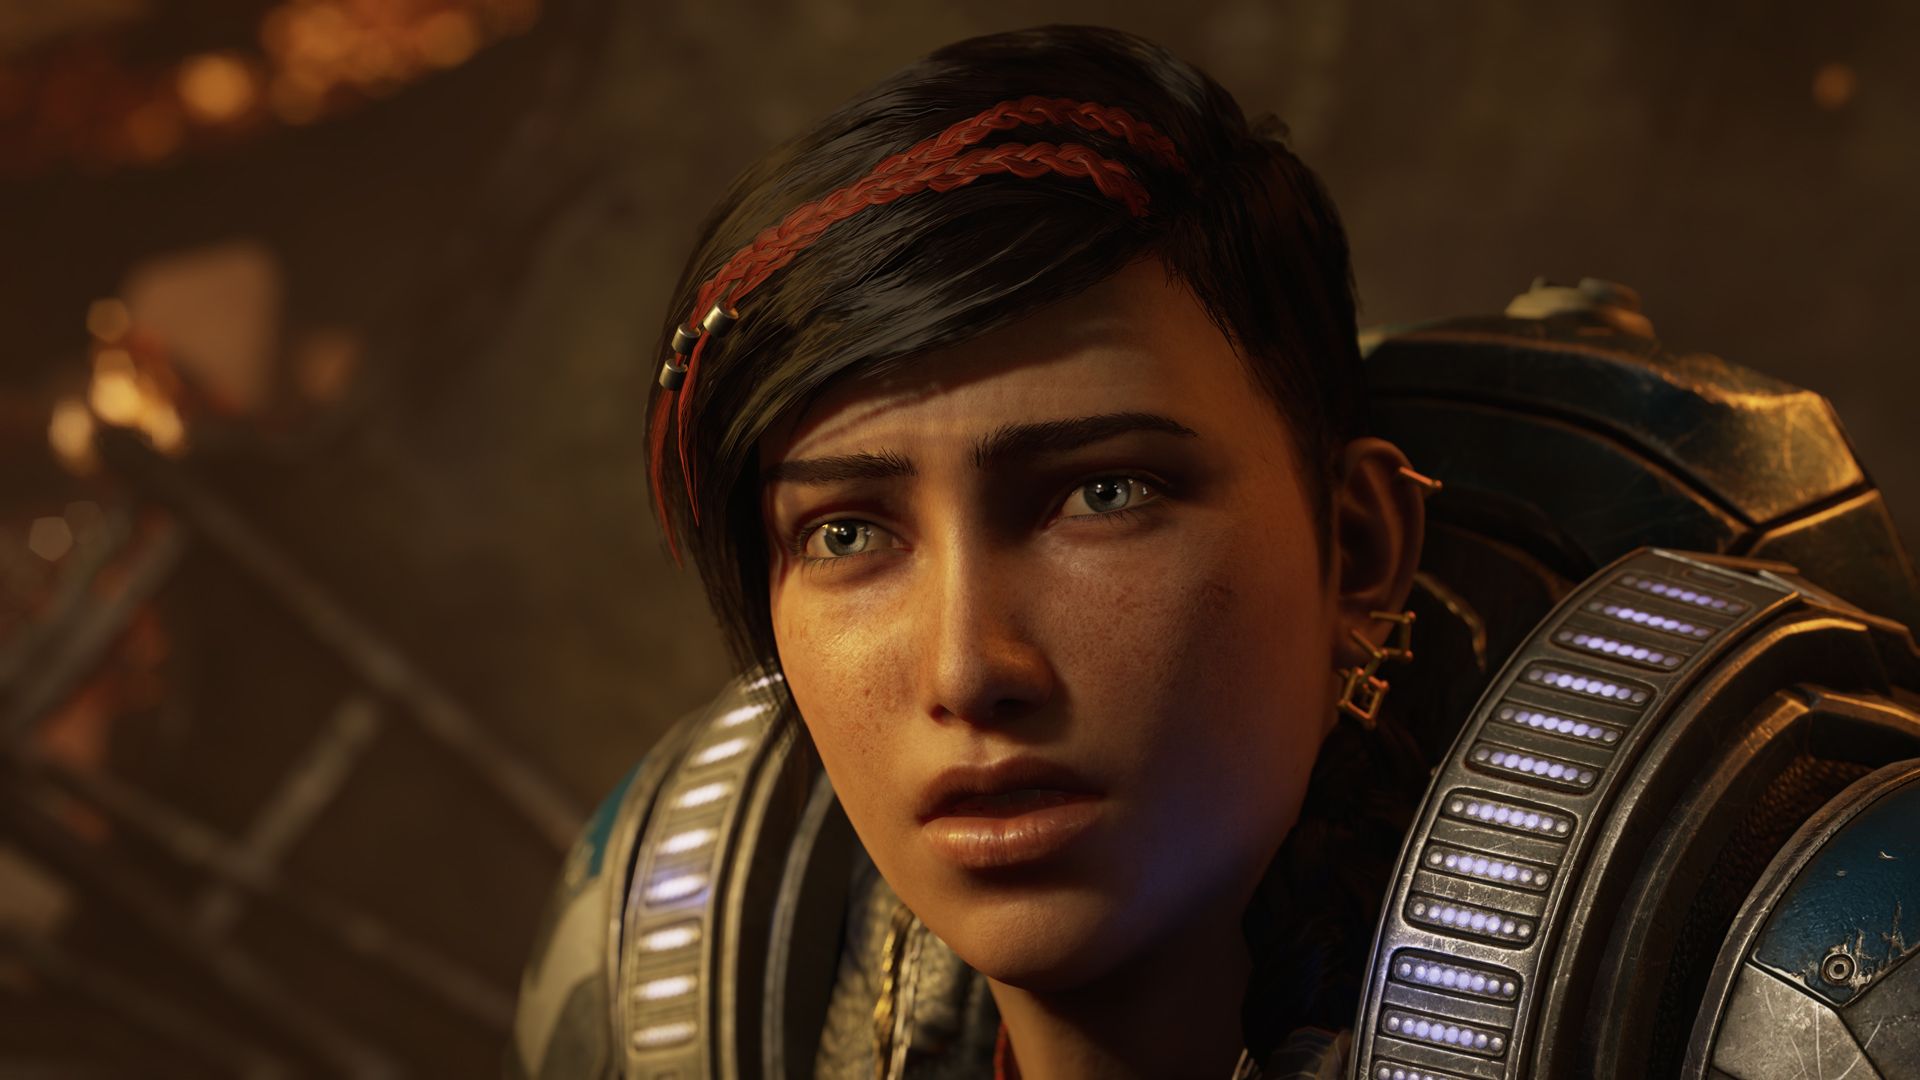 Prepare for the Gears 5 campaign with this Gears of War 4 story recap